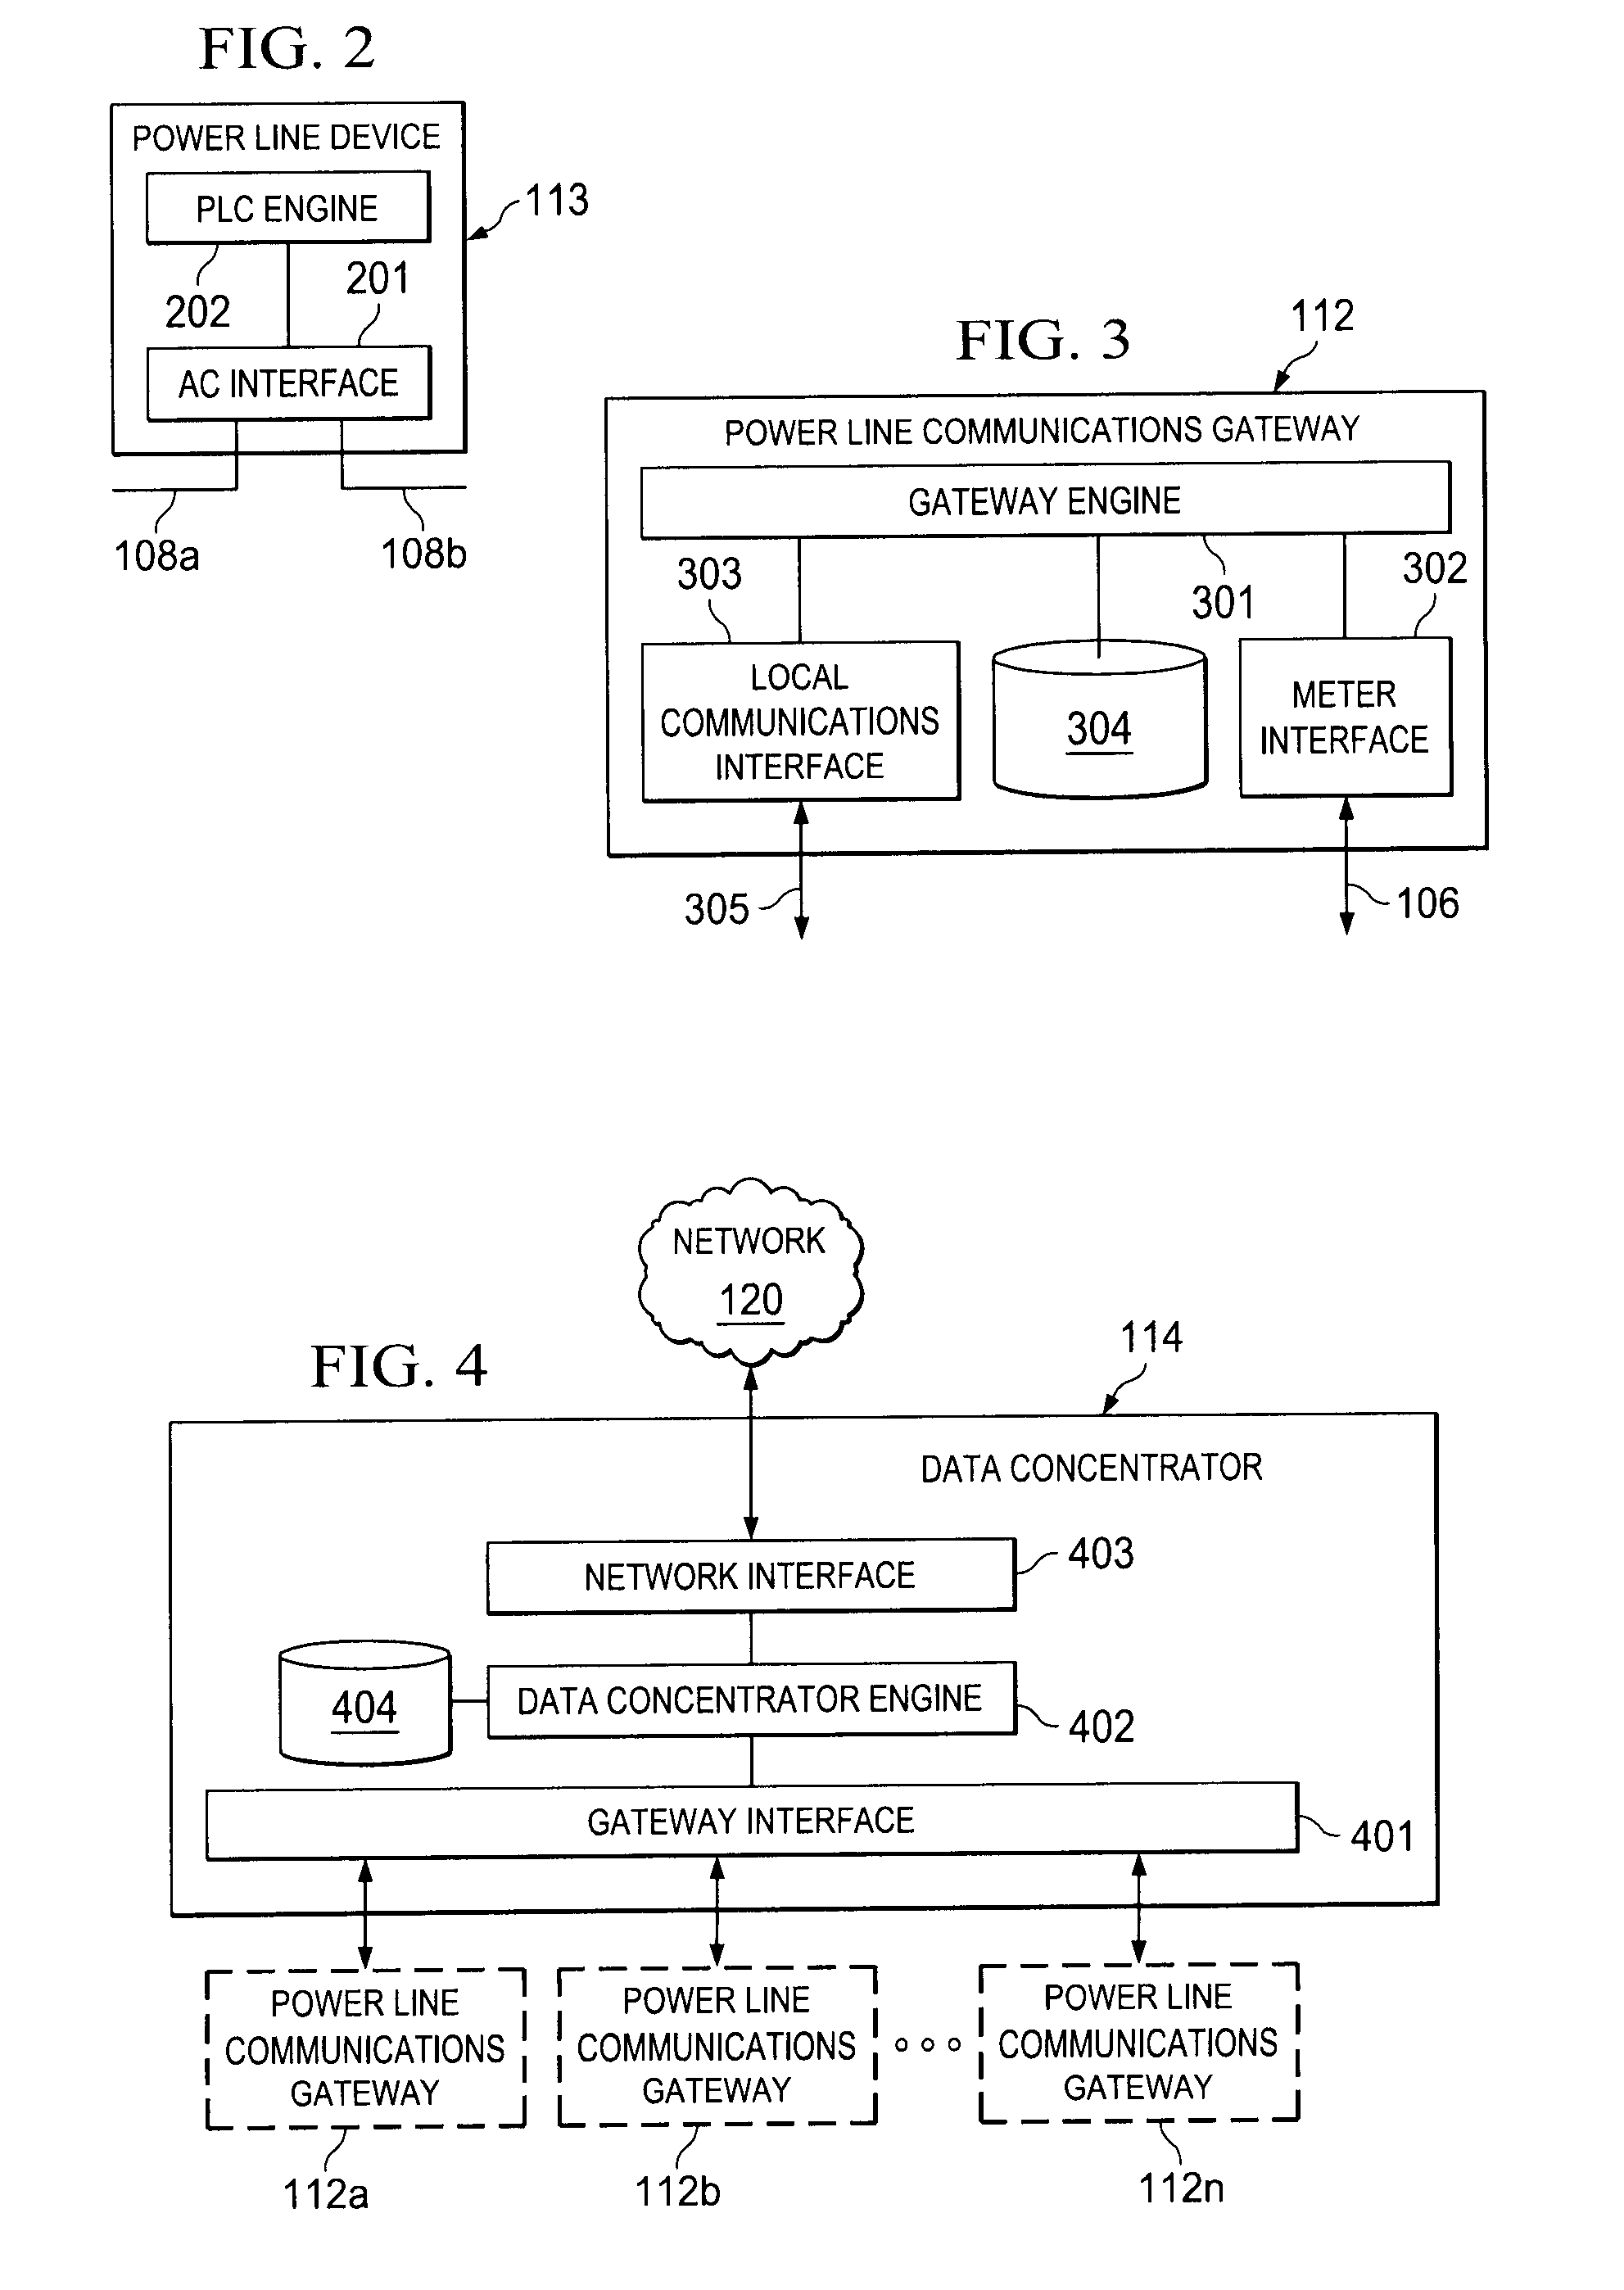 Overlapping Priority Contention Windows for G3 Power Line Communications Networks